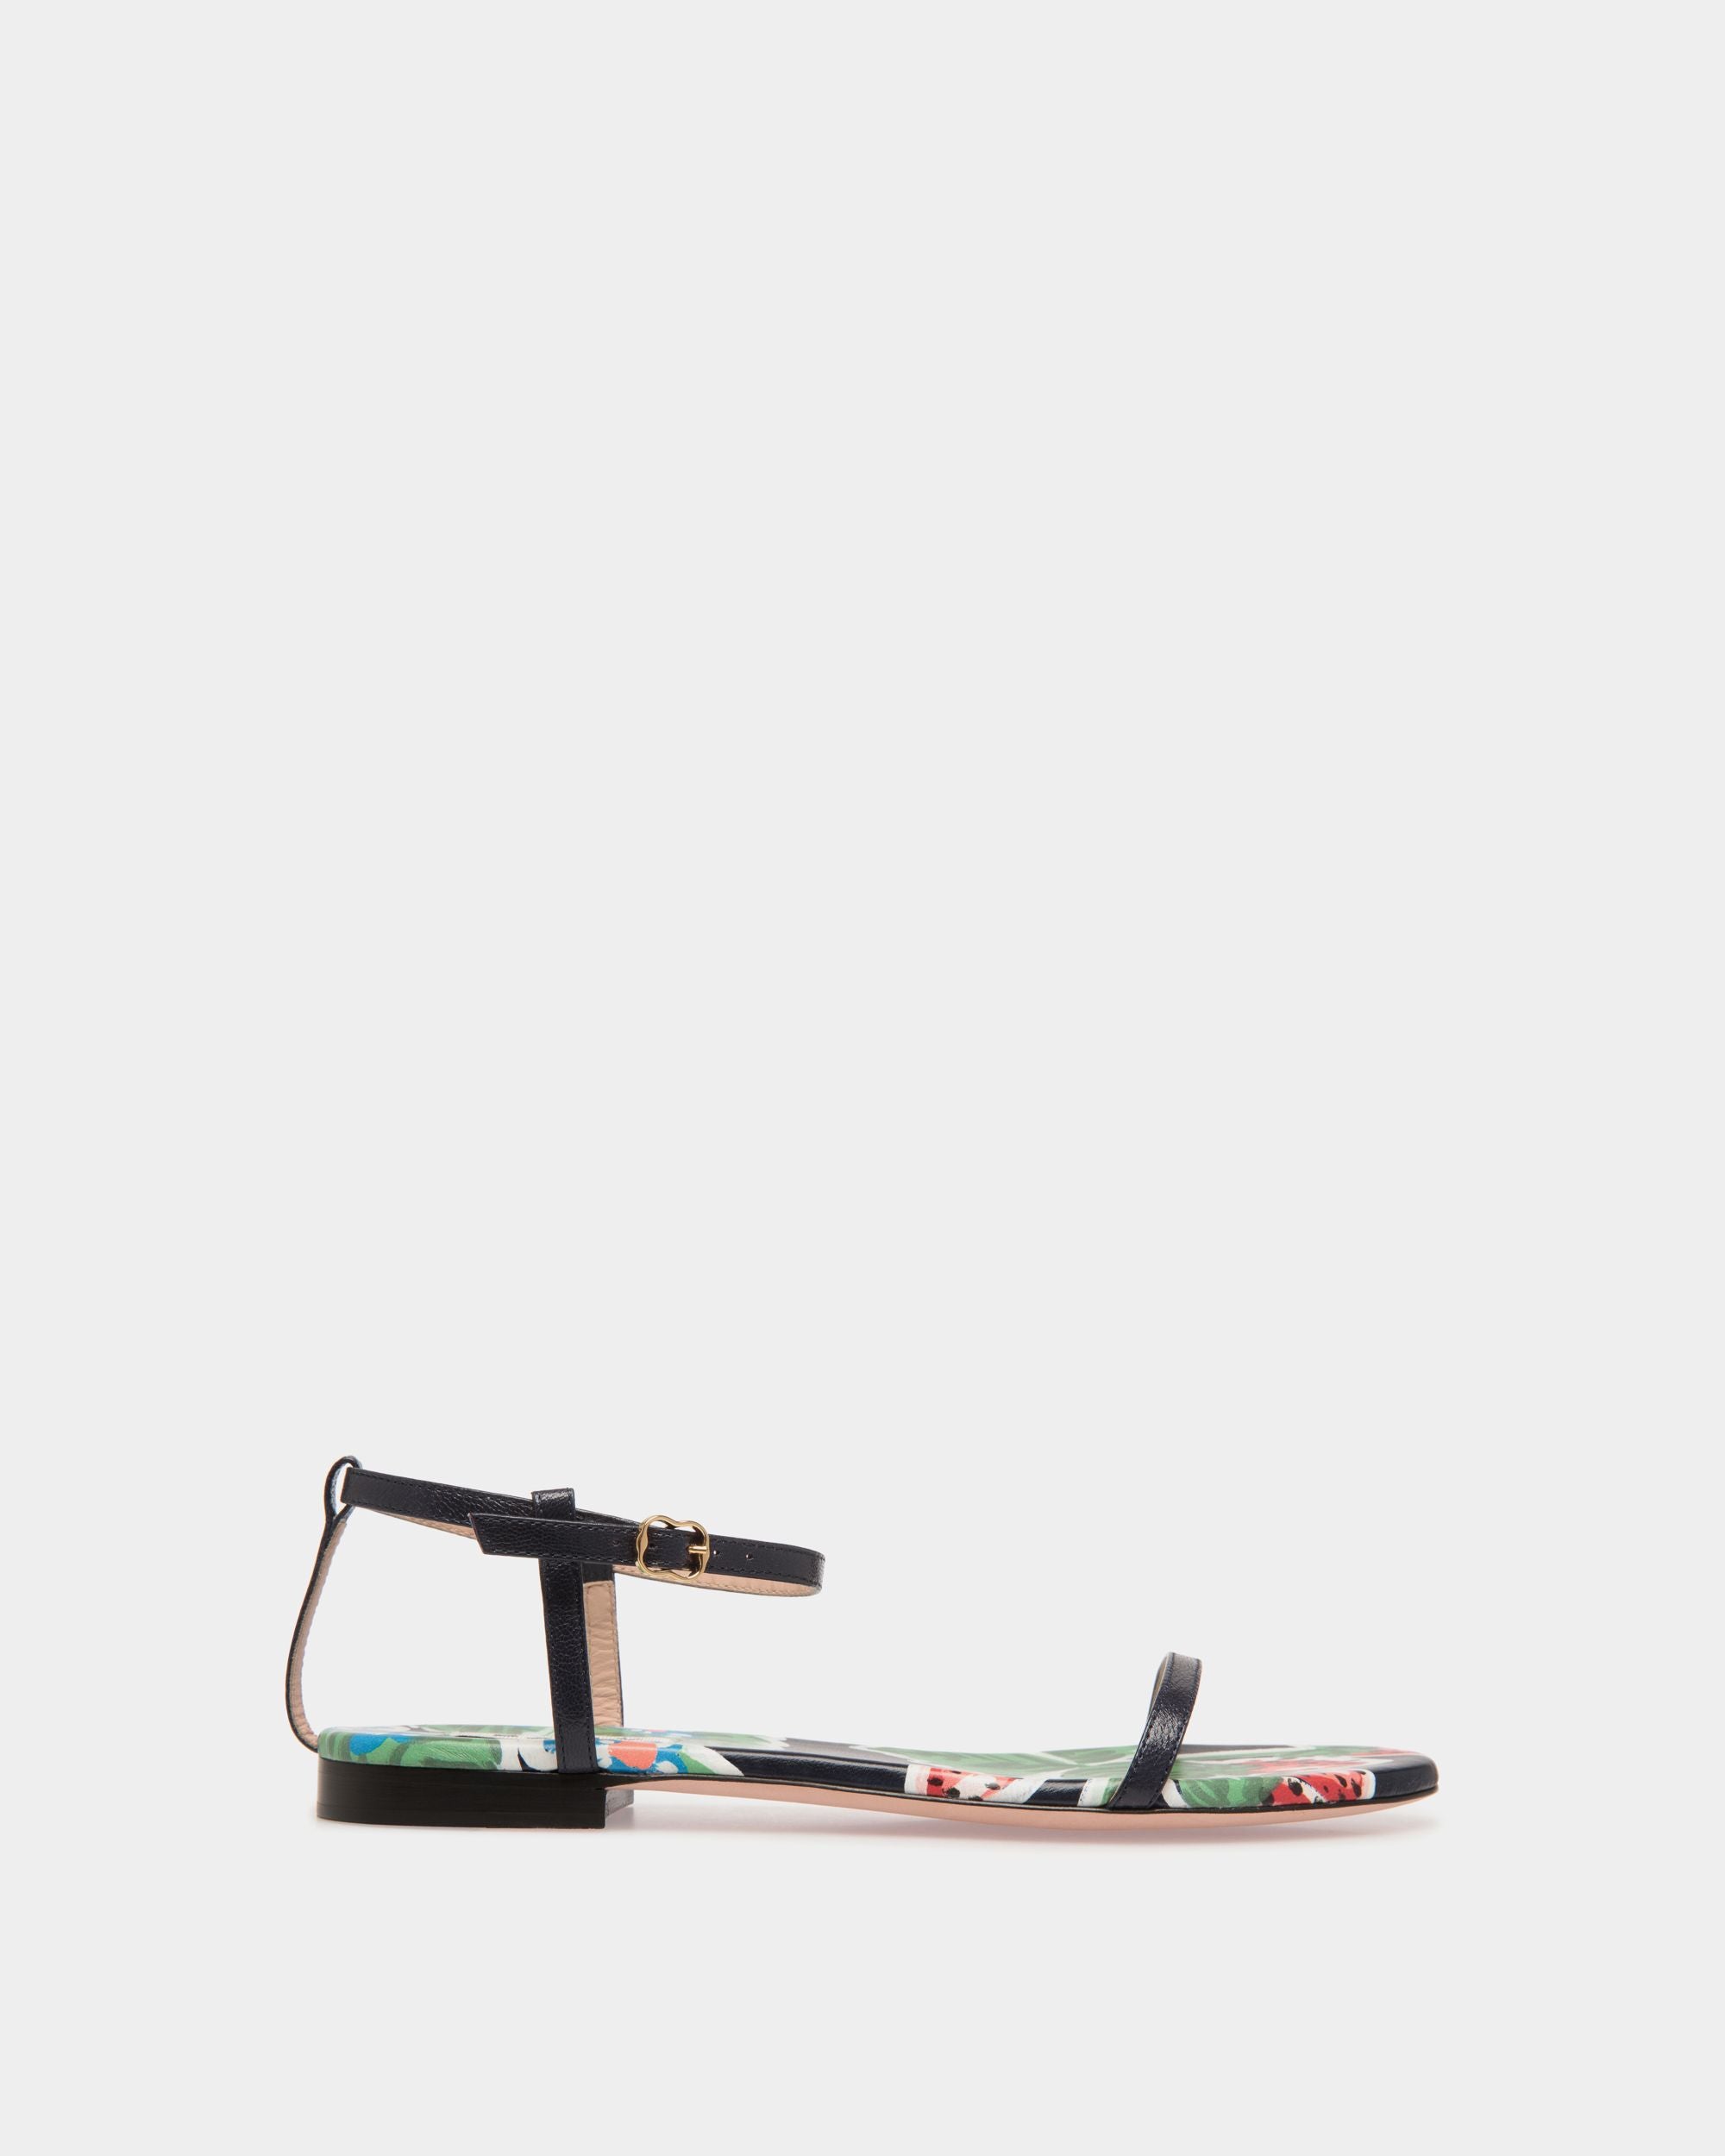 Women's Katy Flat Sandal in Strawberry Print Brushed Leather | Bally | Still Life Side